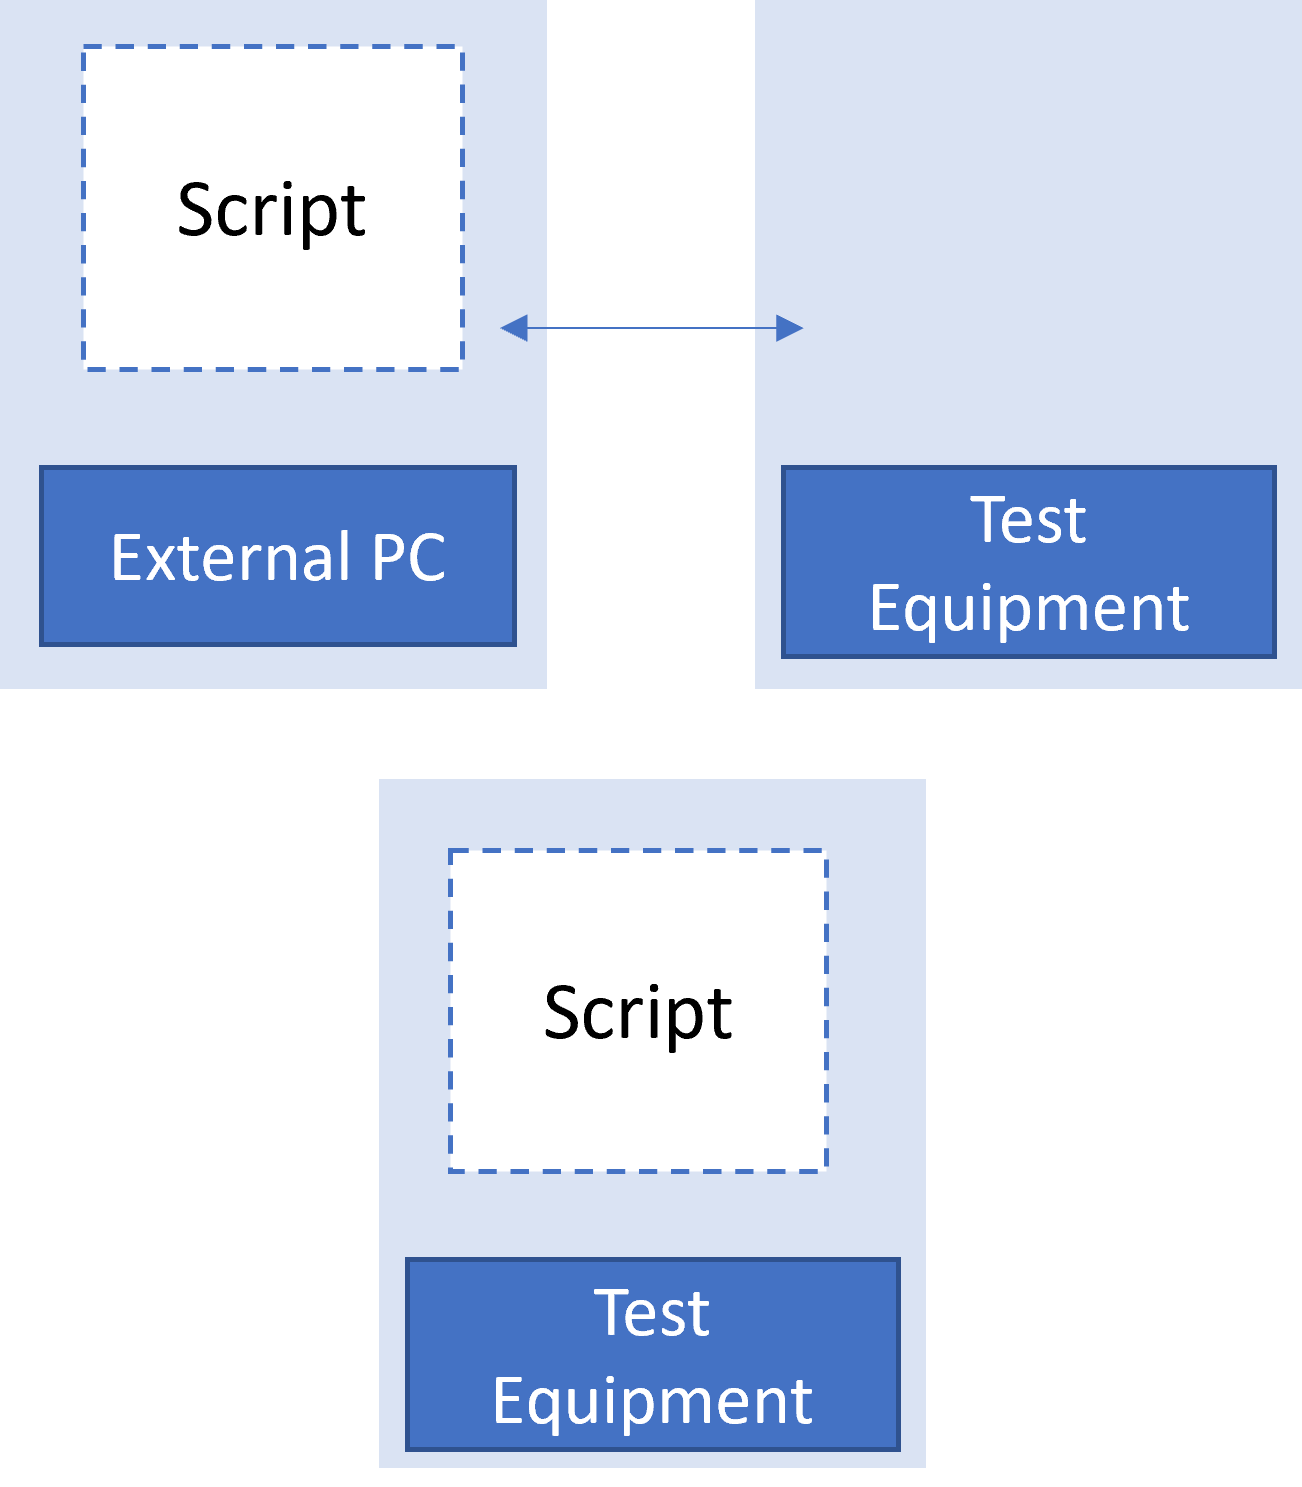 Script can run from external PC or on the test equipment itself